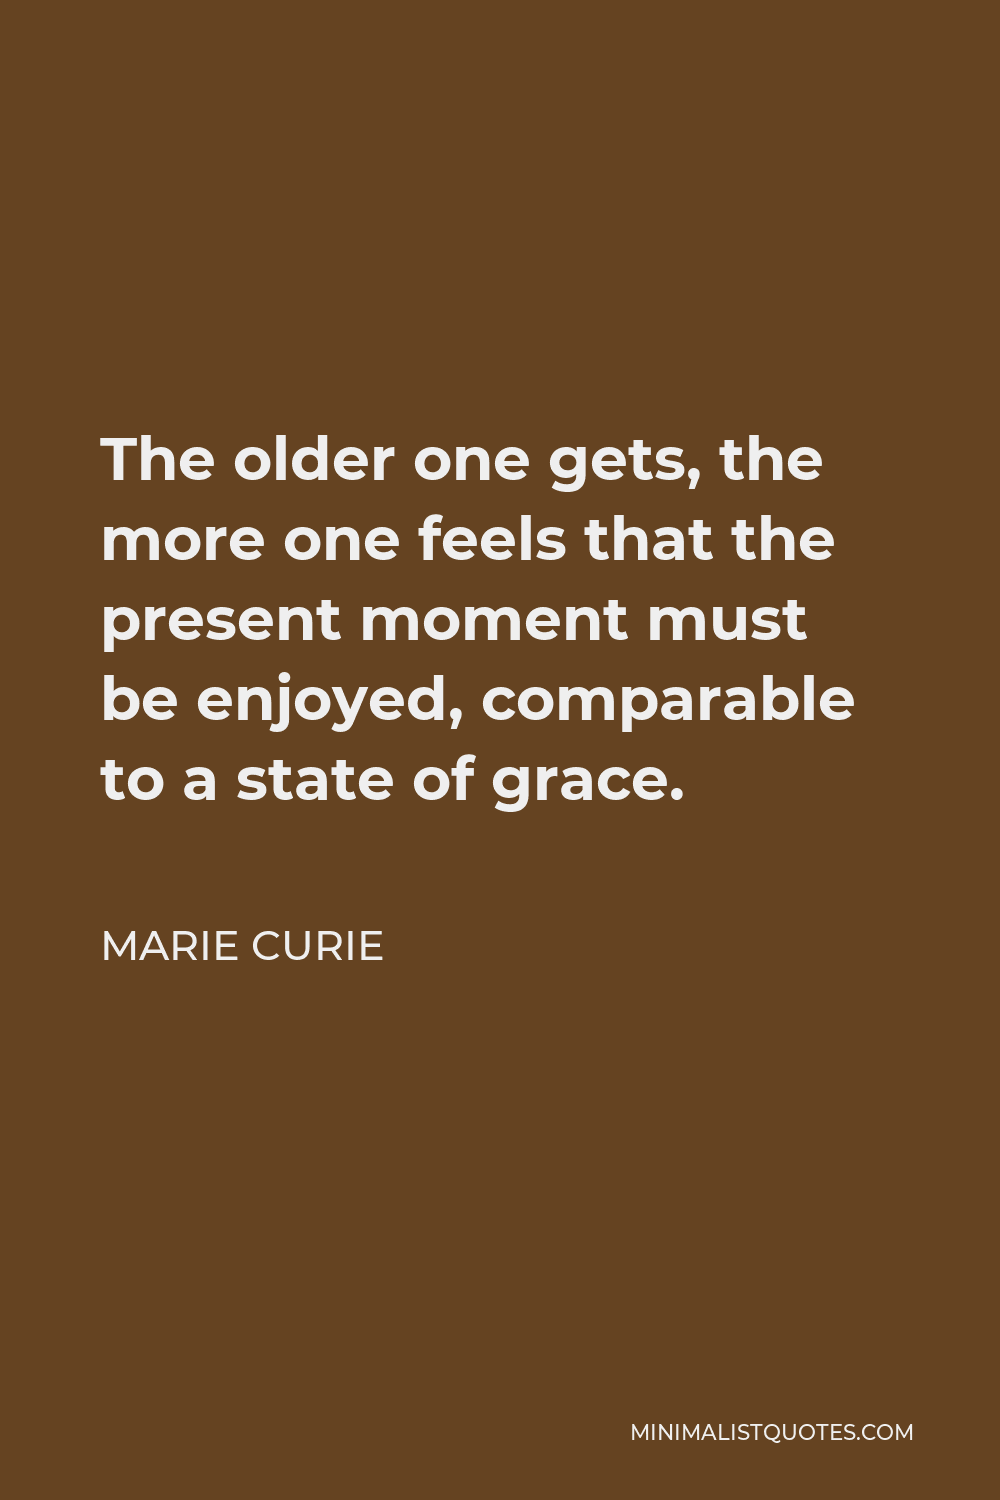 Marie Curie Quote - The older one gets, the more one feels that the present moment must be enjoyed, comparable to a state of grace.